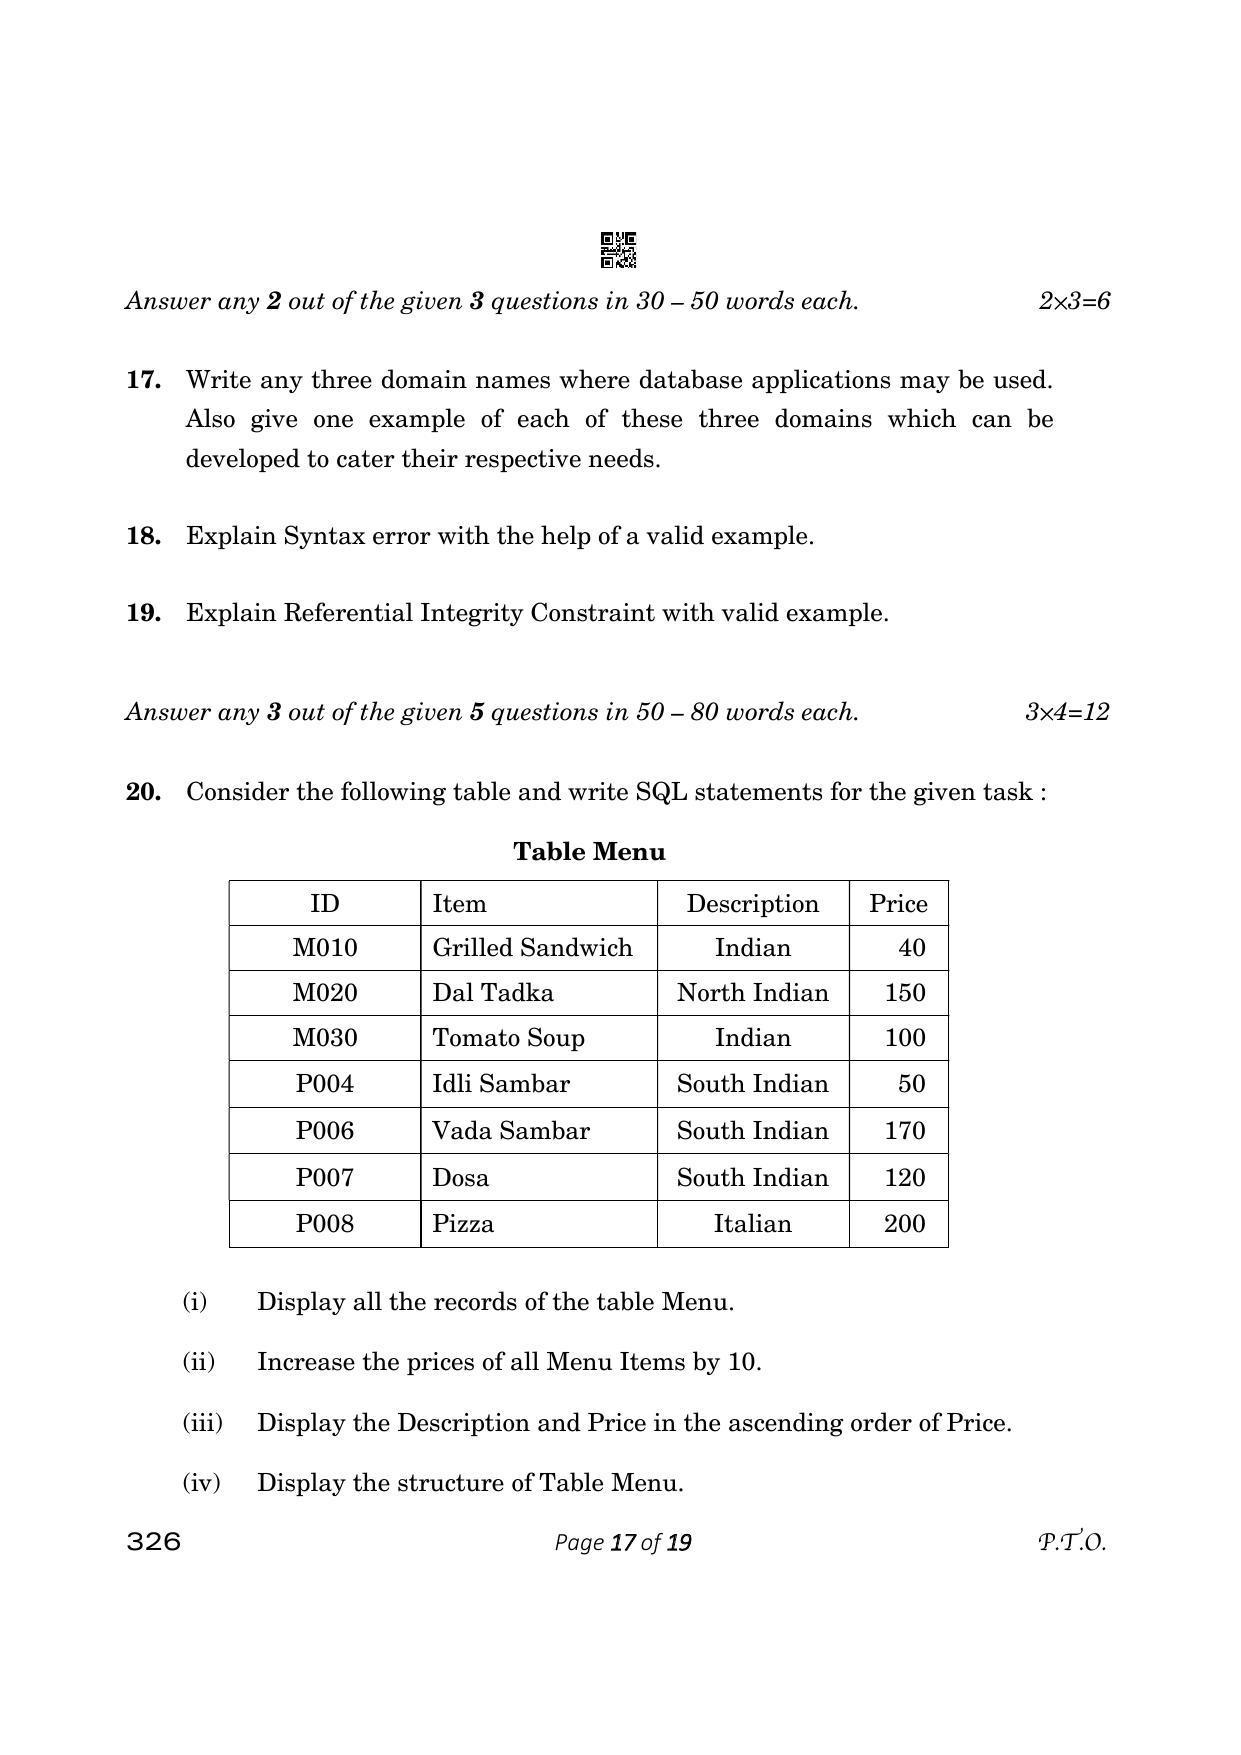 CBSE Class 12 Information Technology (Compartment) 2023 Question Paper - Page 17